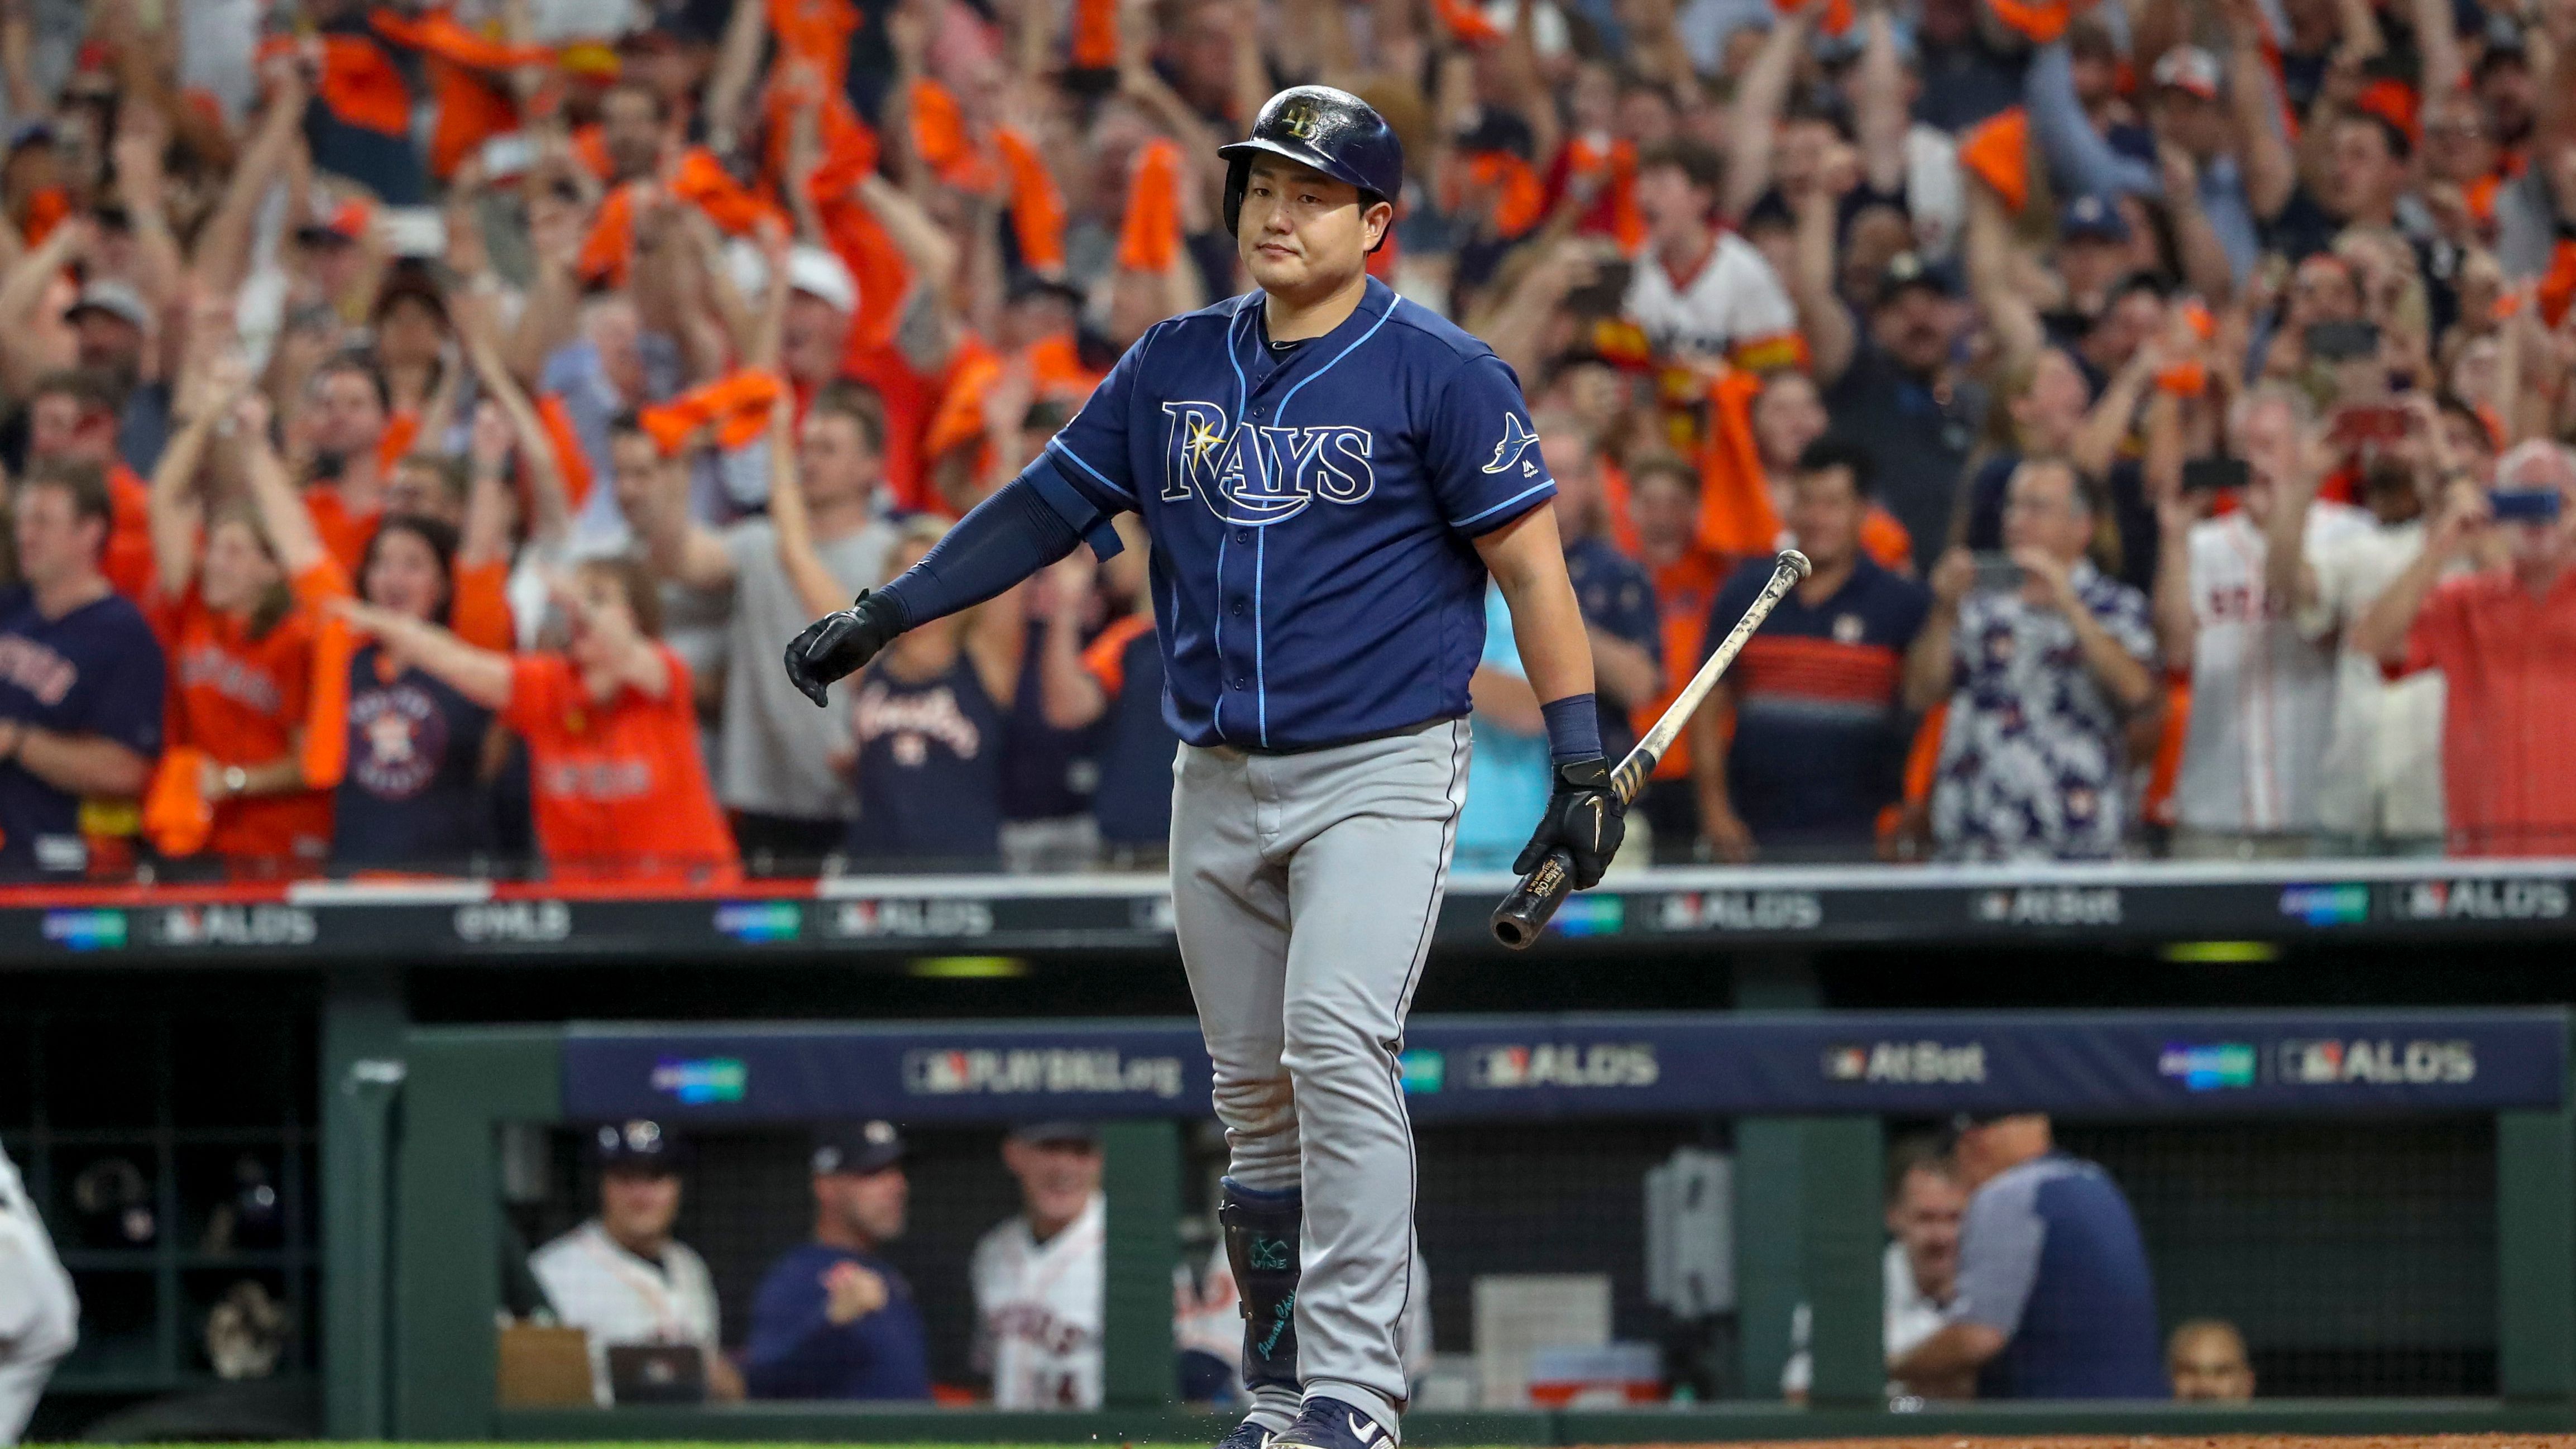 If the Astros cheated against the Rays, the results say it didn't matter  much